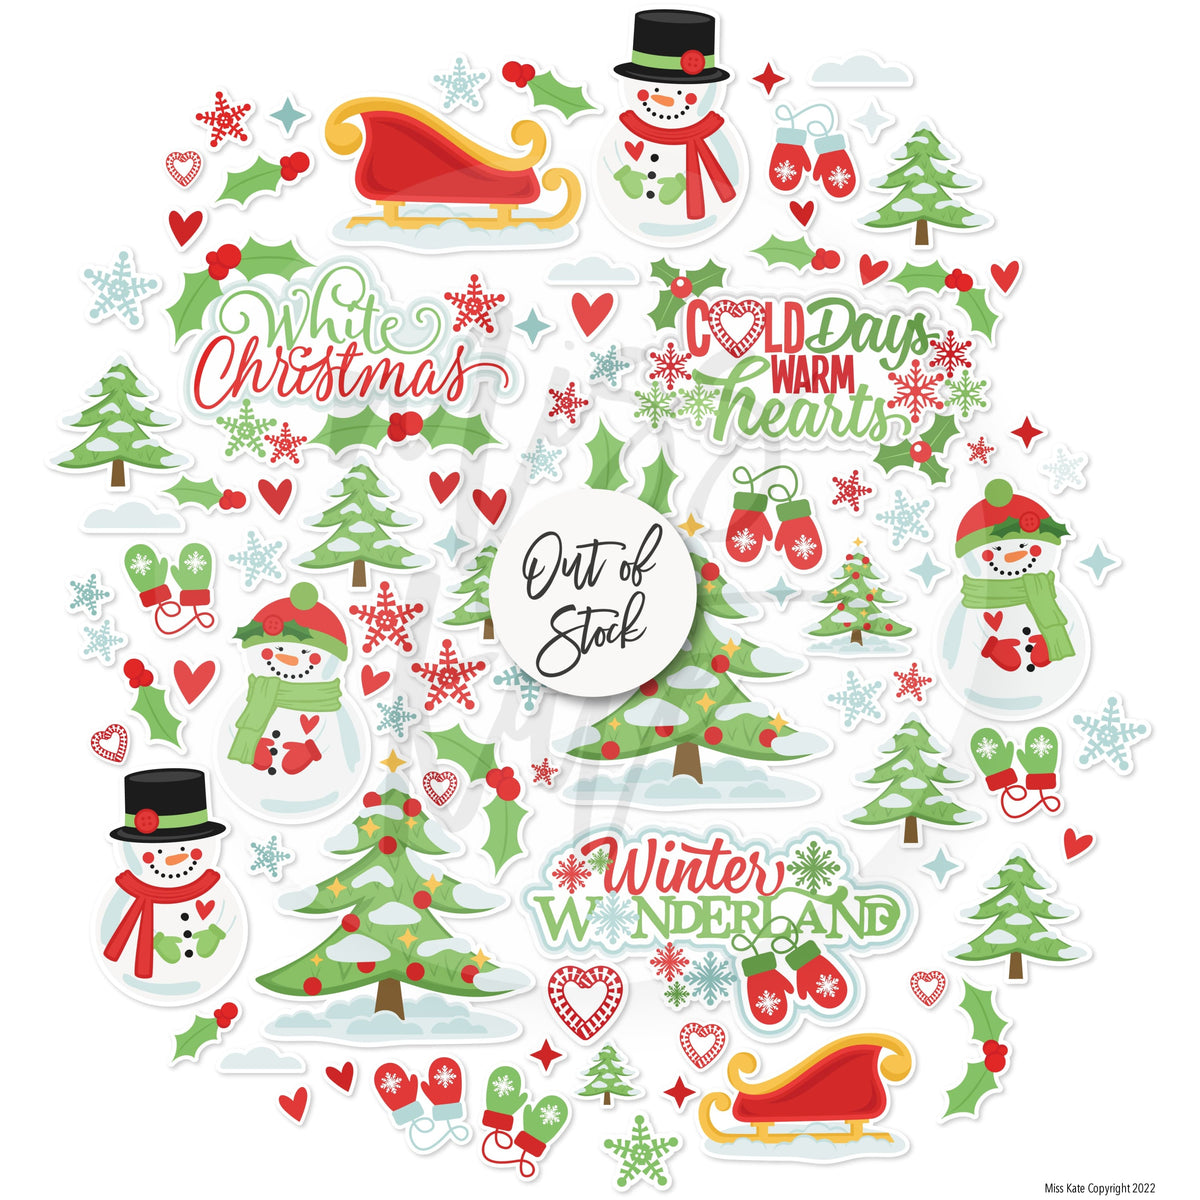 Holly Jolly - Double Sided Paper Pack